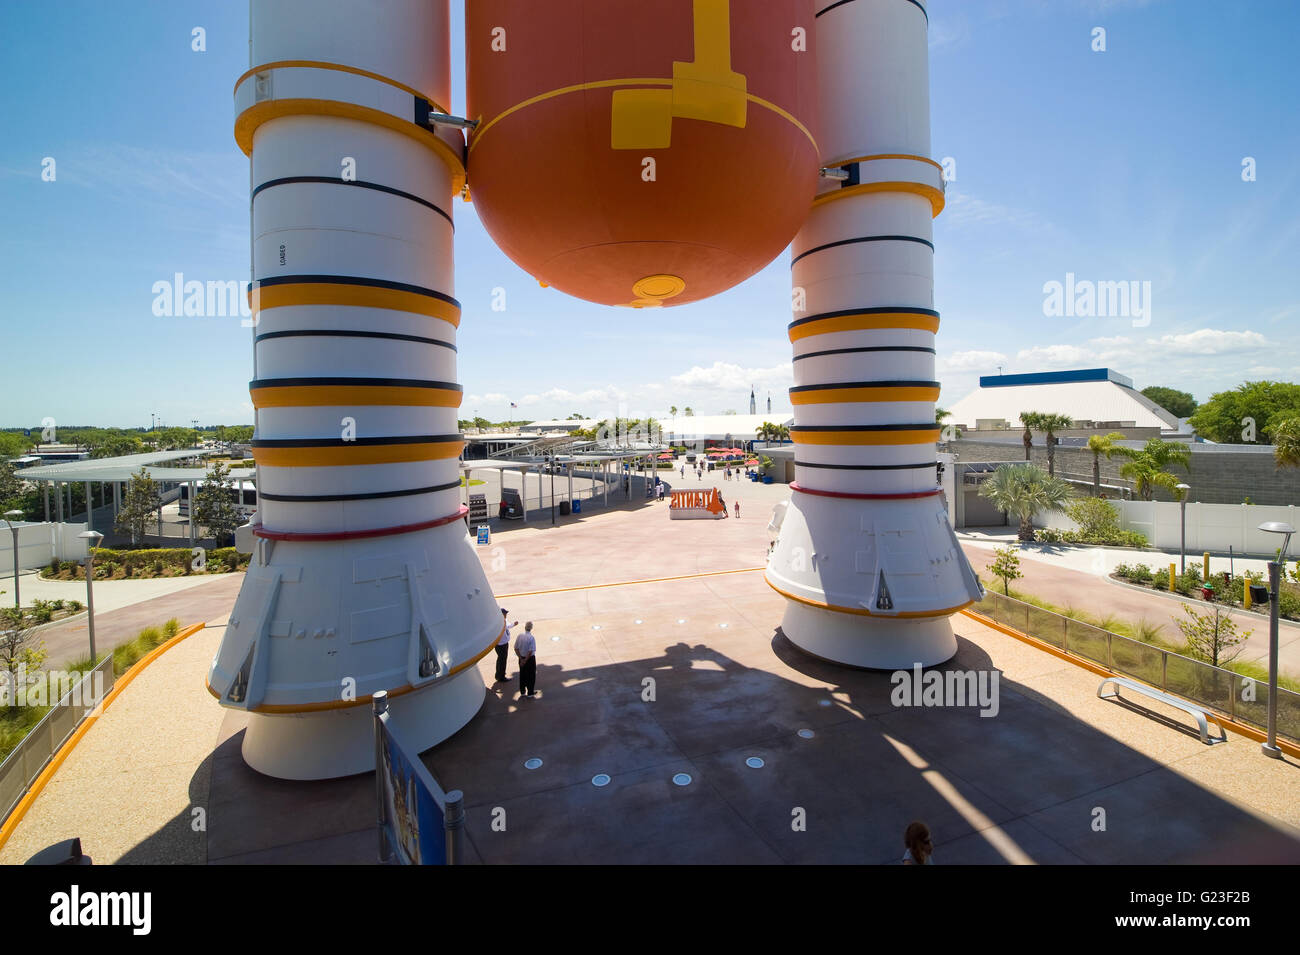 Boosters and fuel tank in front of the the entrance of the building where SPace Shuttle Atlantis is being exhibited Stock Photo